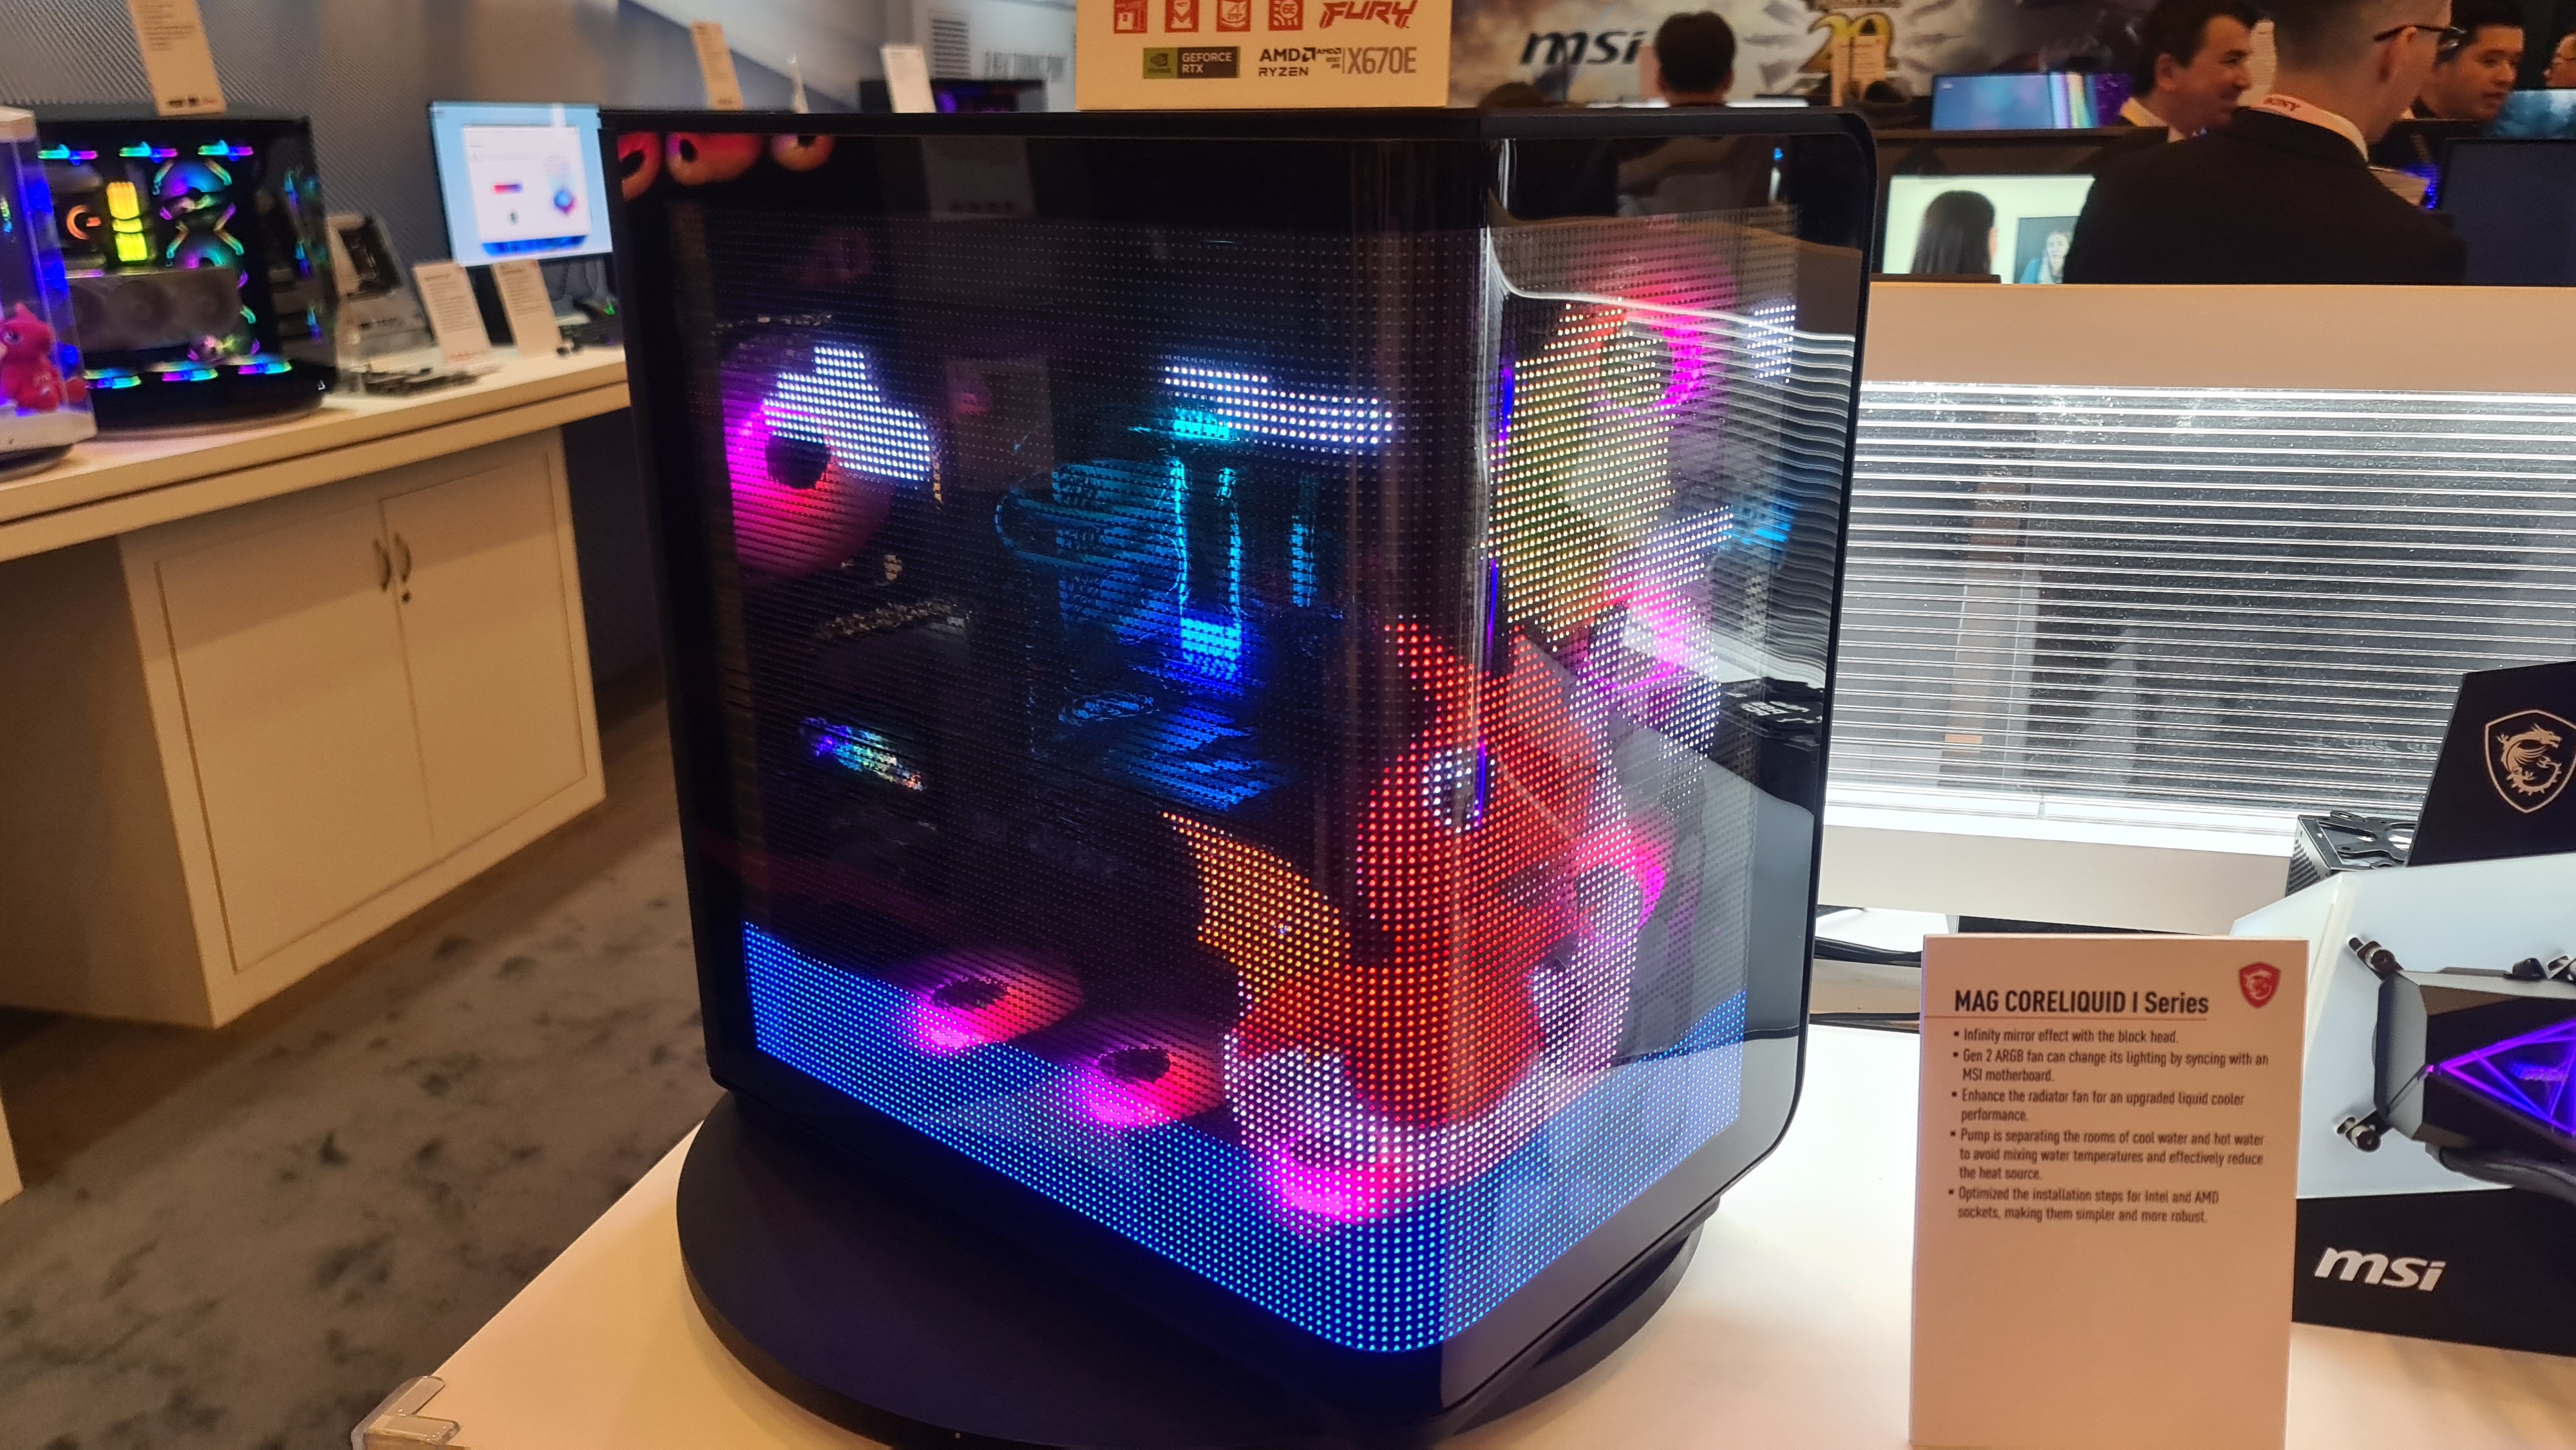  MSI stuck a transparent LED crystal film screen in its new fishbowl case and it looks genuinely impressive in action 